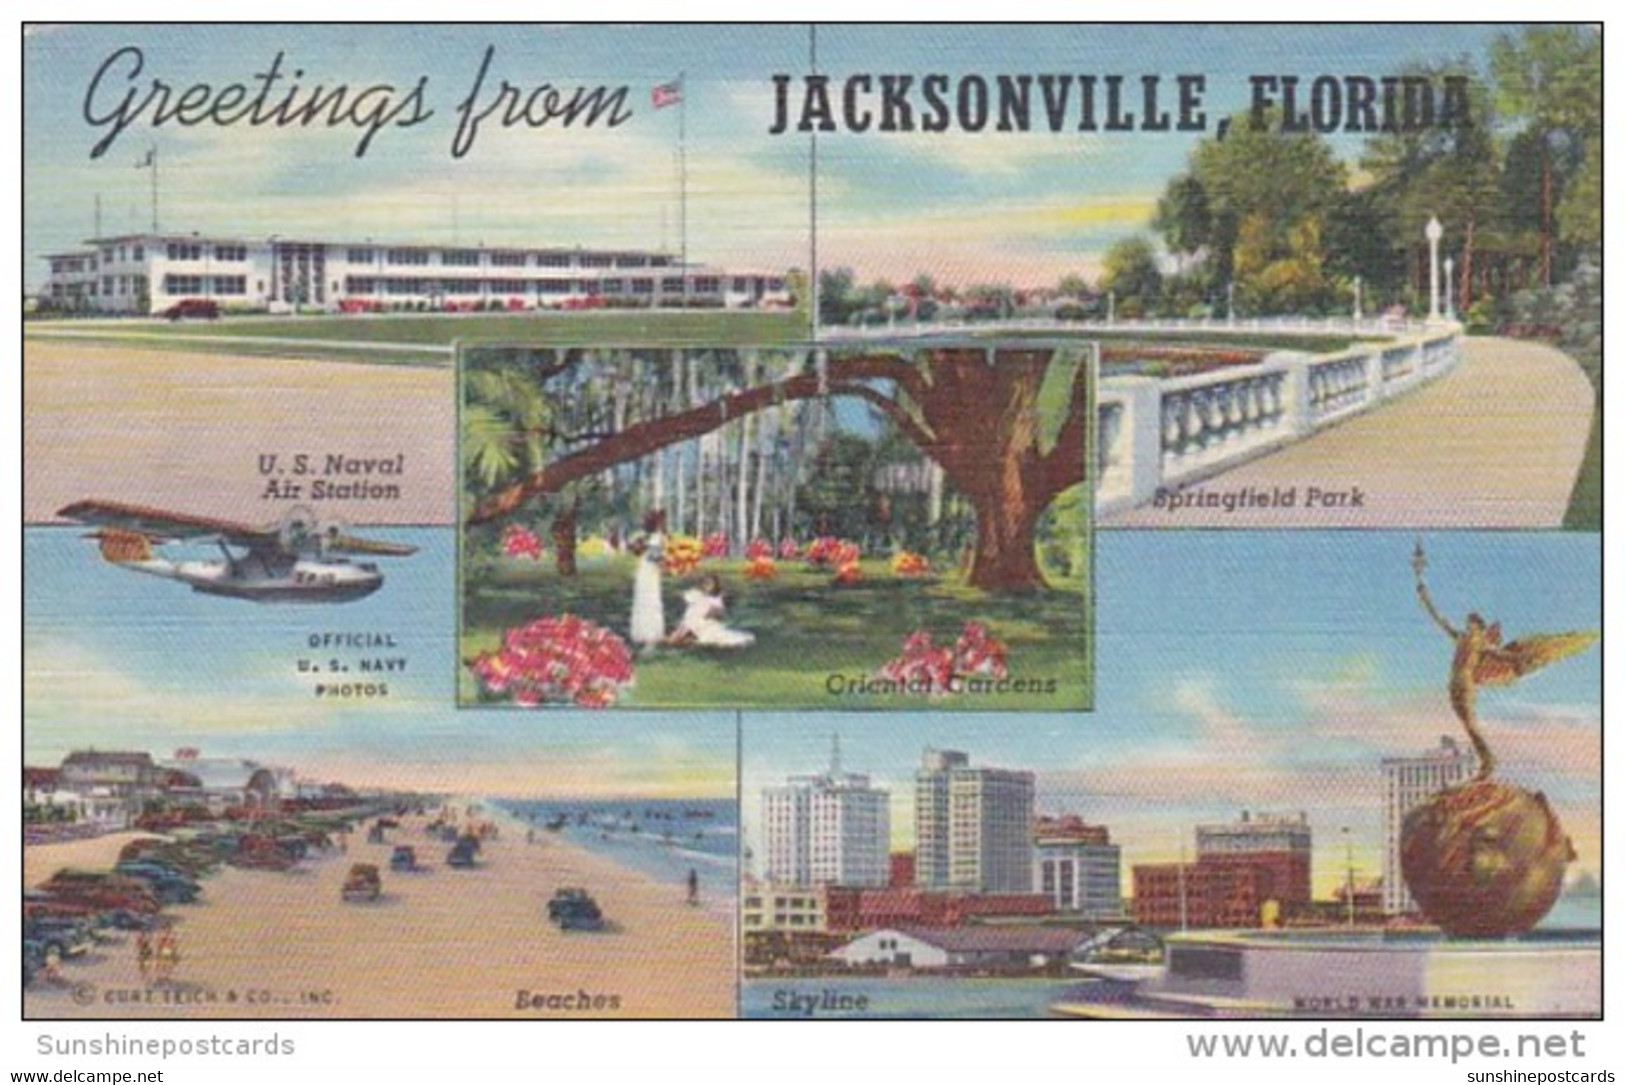 Florida Jacksonville Greetings From Showing Naval Air Station The Beaches Springfield Park 1943 Curteich - Jacksonville